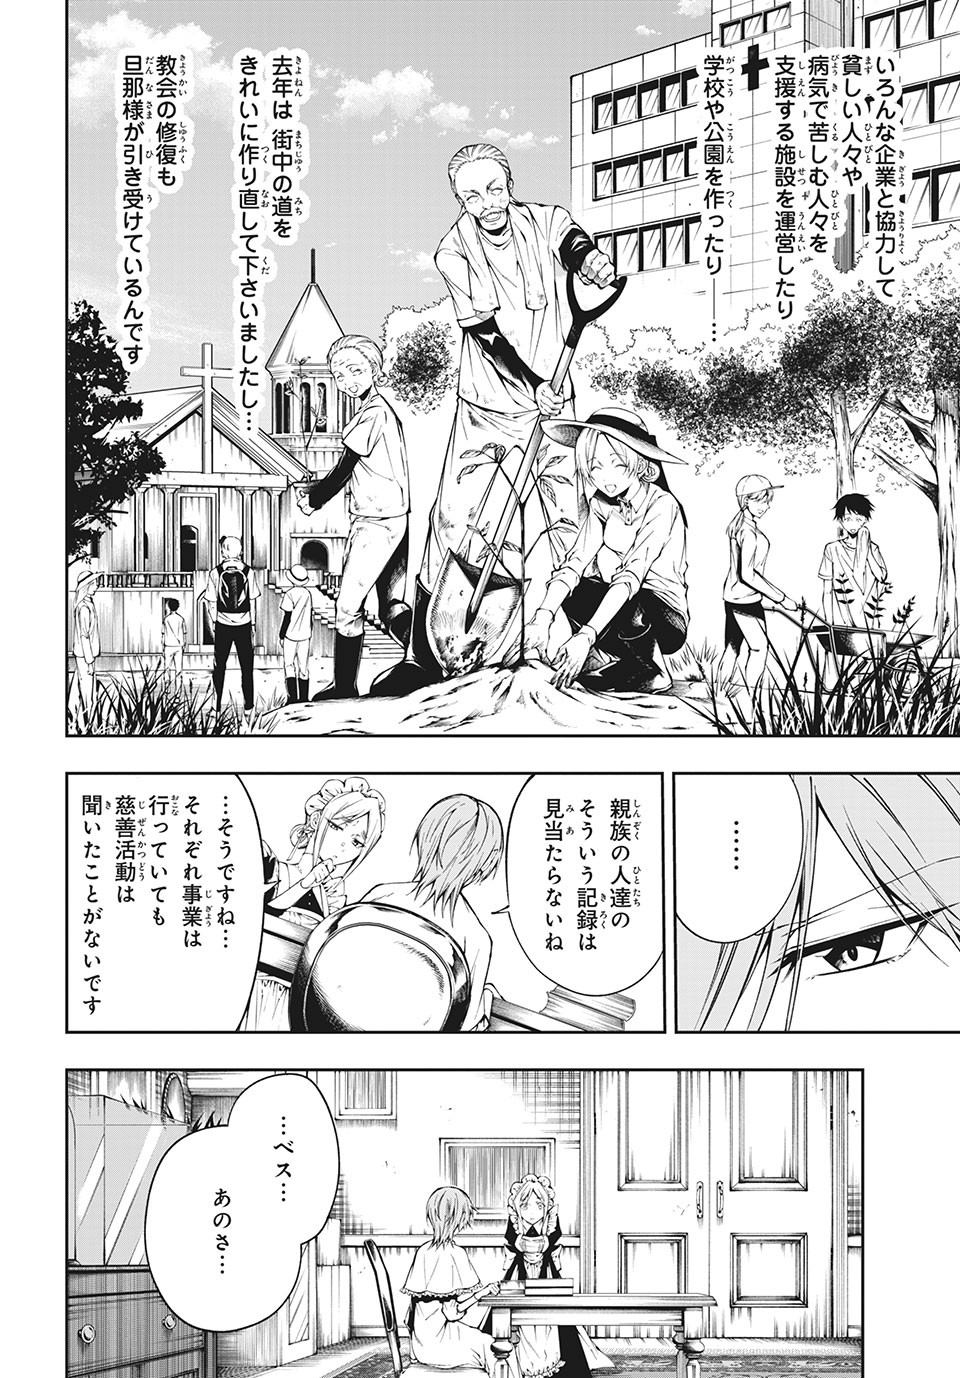 Shaman King: and a garden 第3.1話 - Page 4